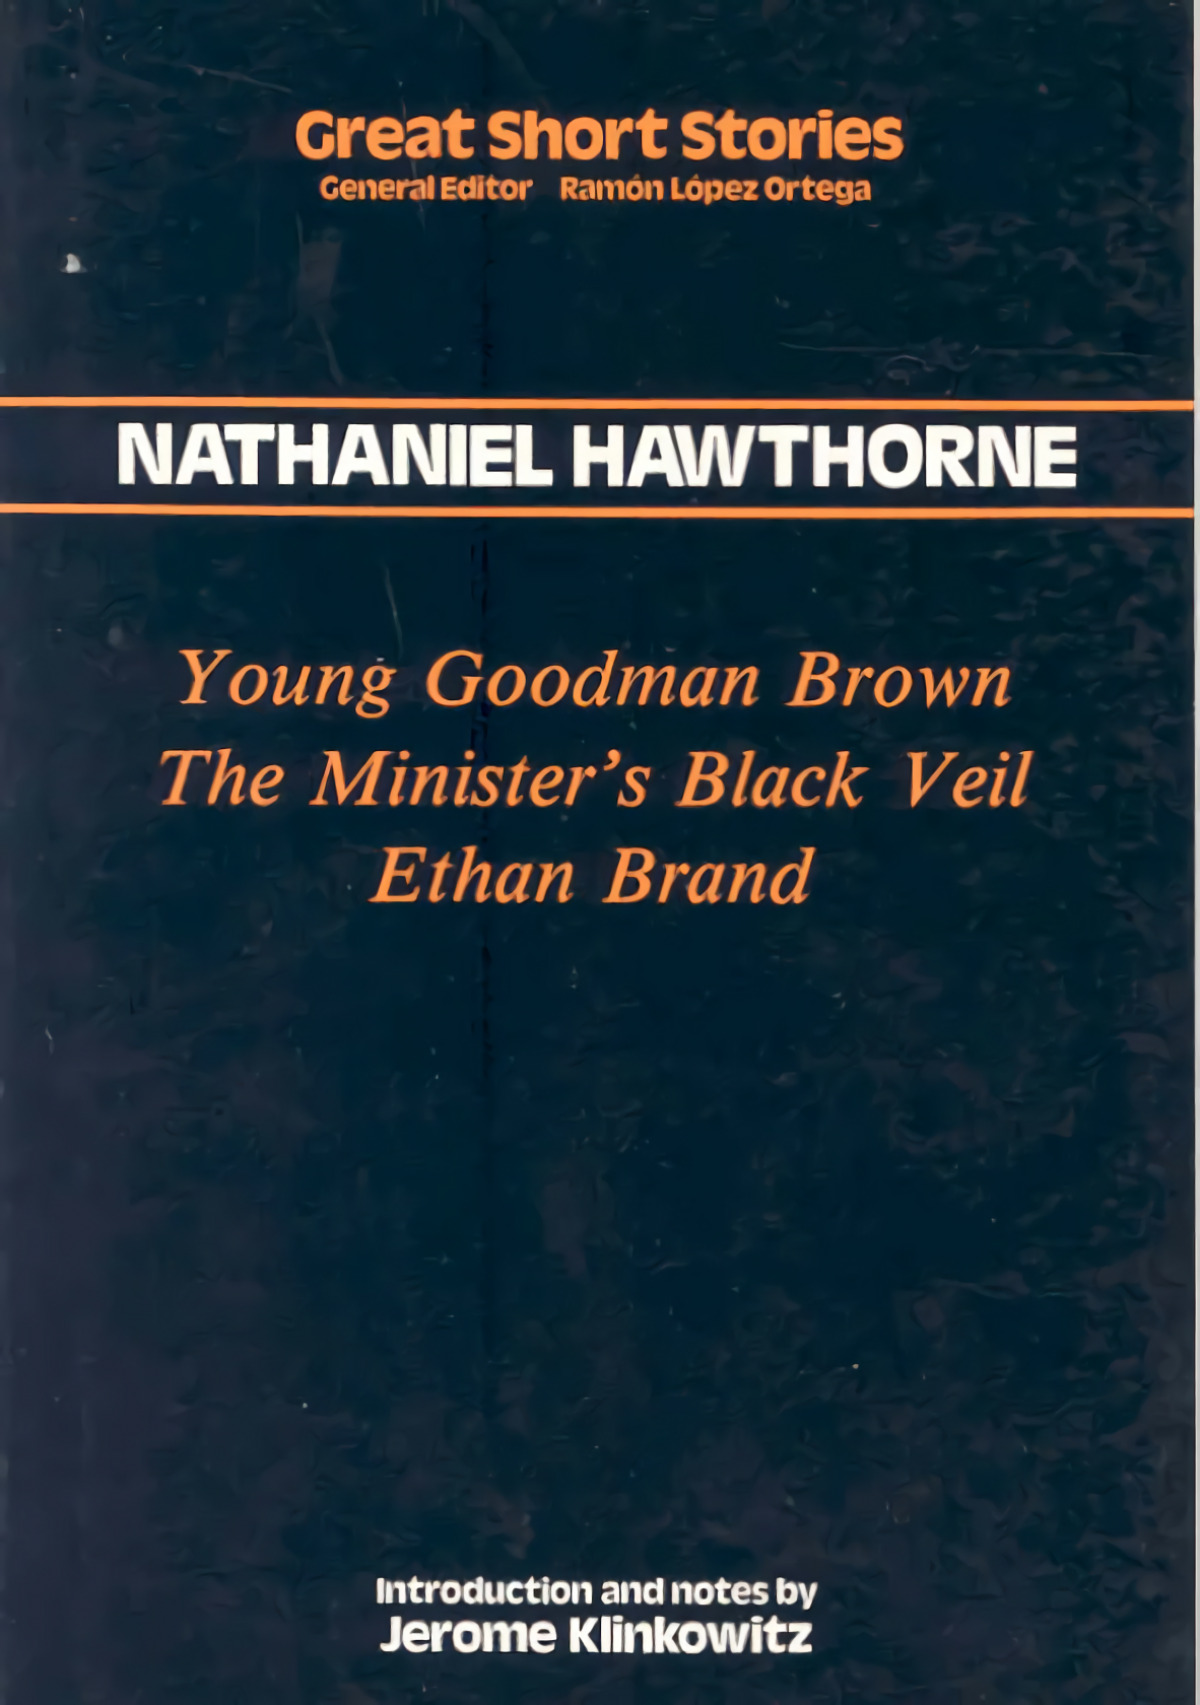 Young goodman brown. The Minister's Black Veil. Ethan Brand - Hawthorne, Nathaniel